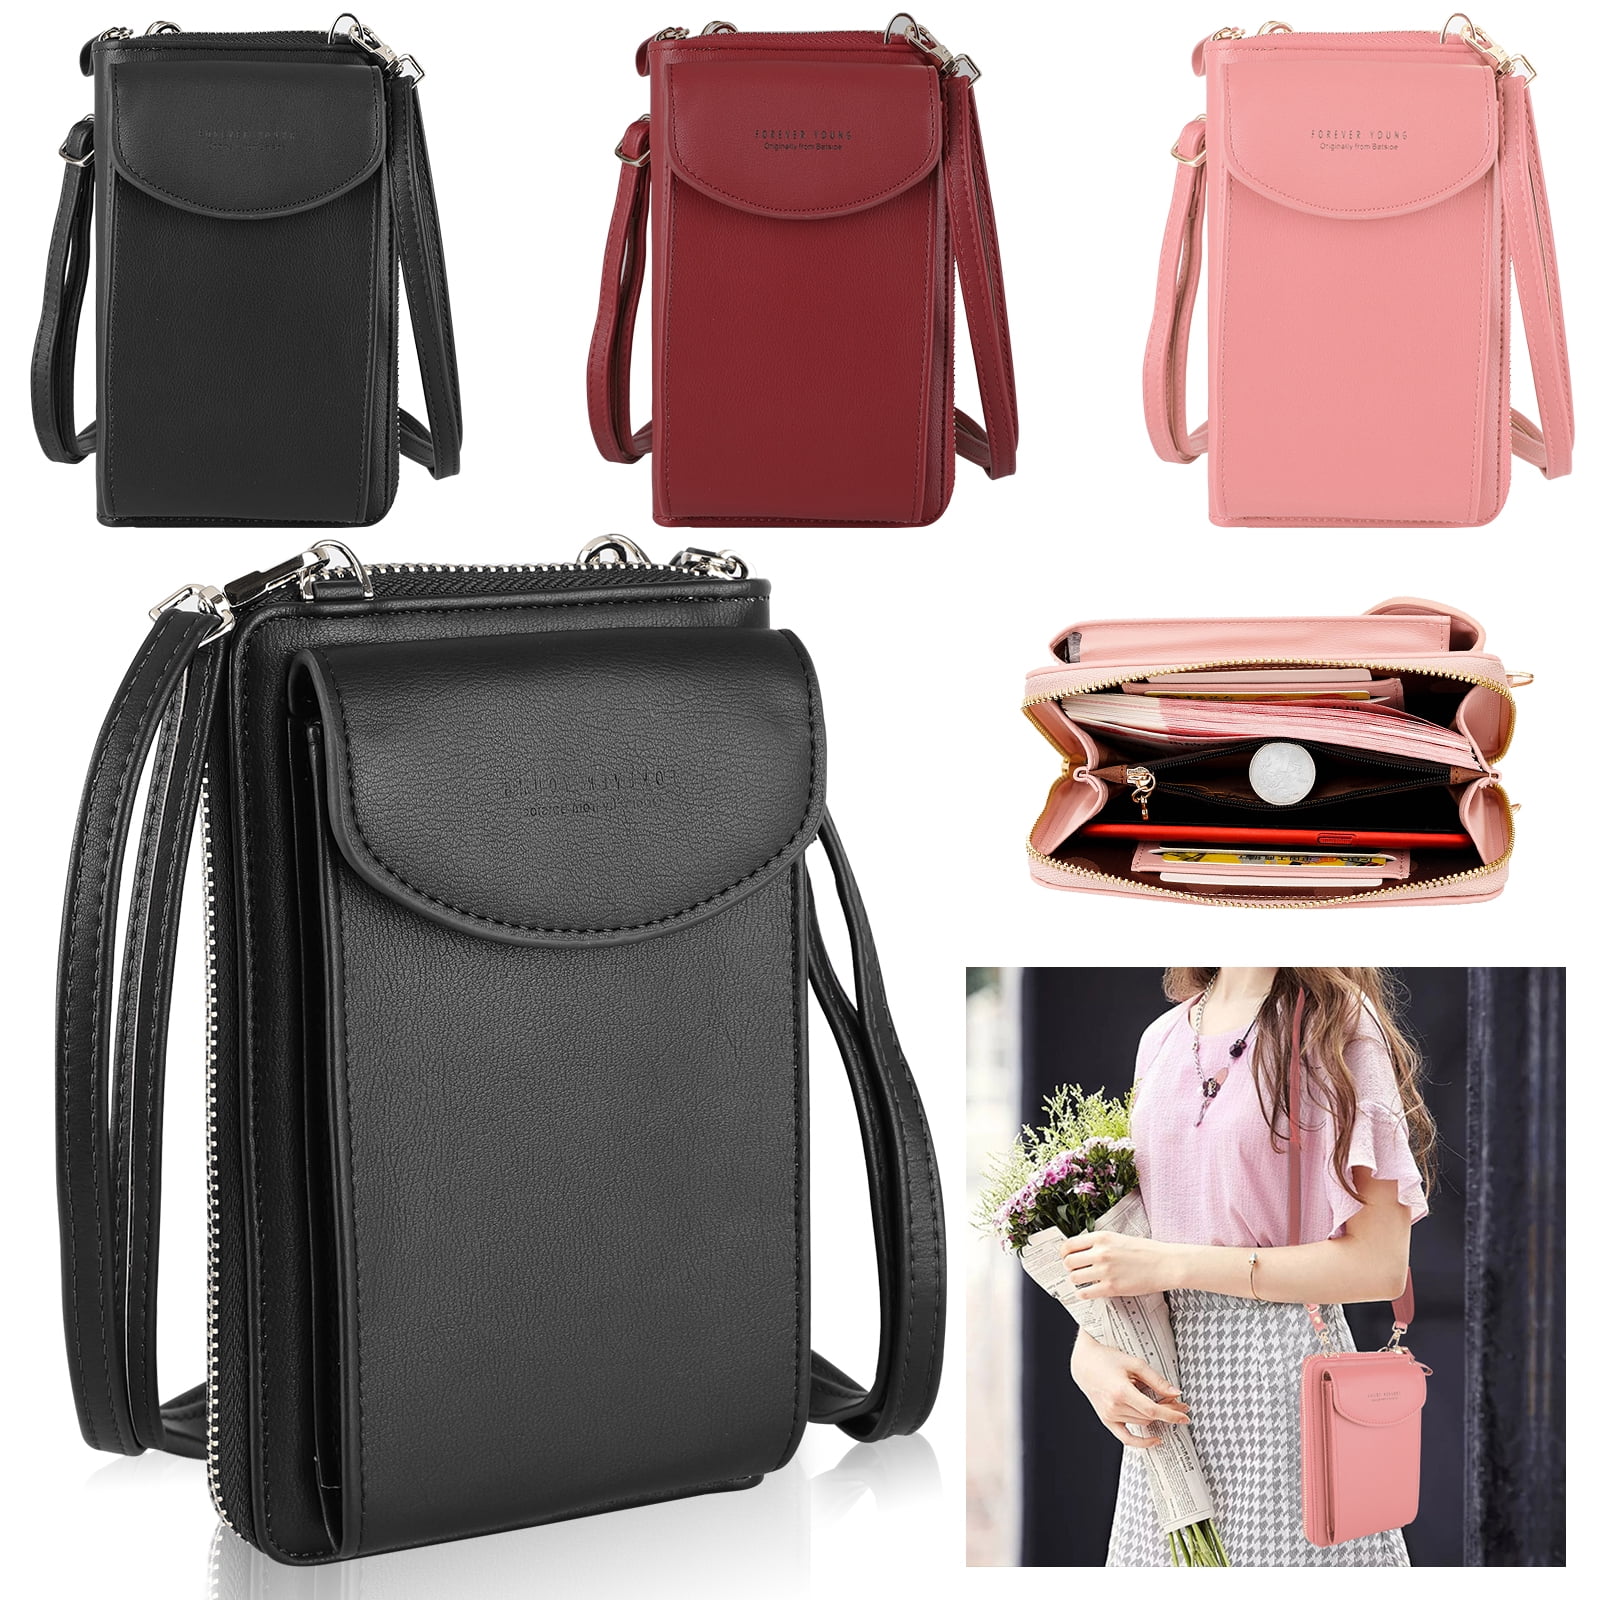 Tsv Cell Phone Purse For Women Small Pu Leather Crossbody Cellphone Bag Wallet With Card